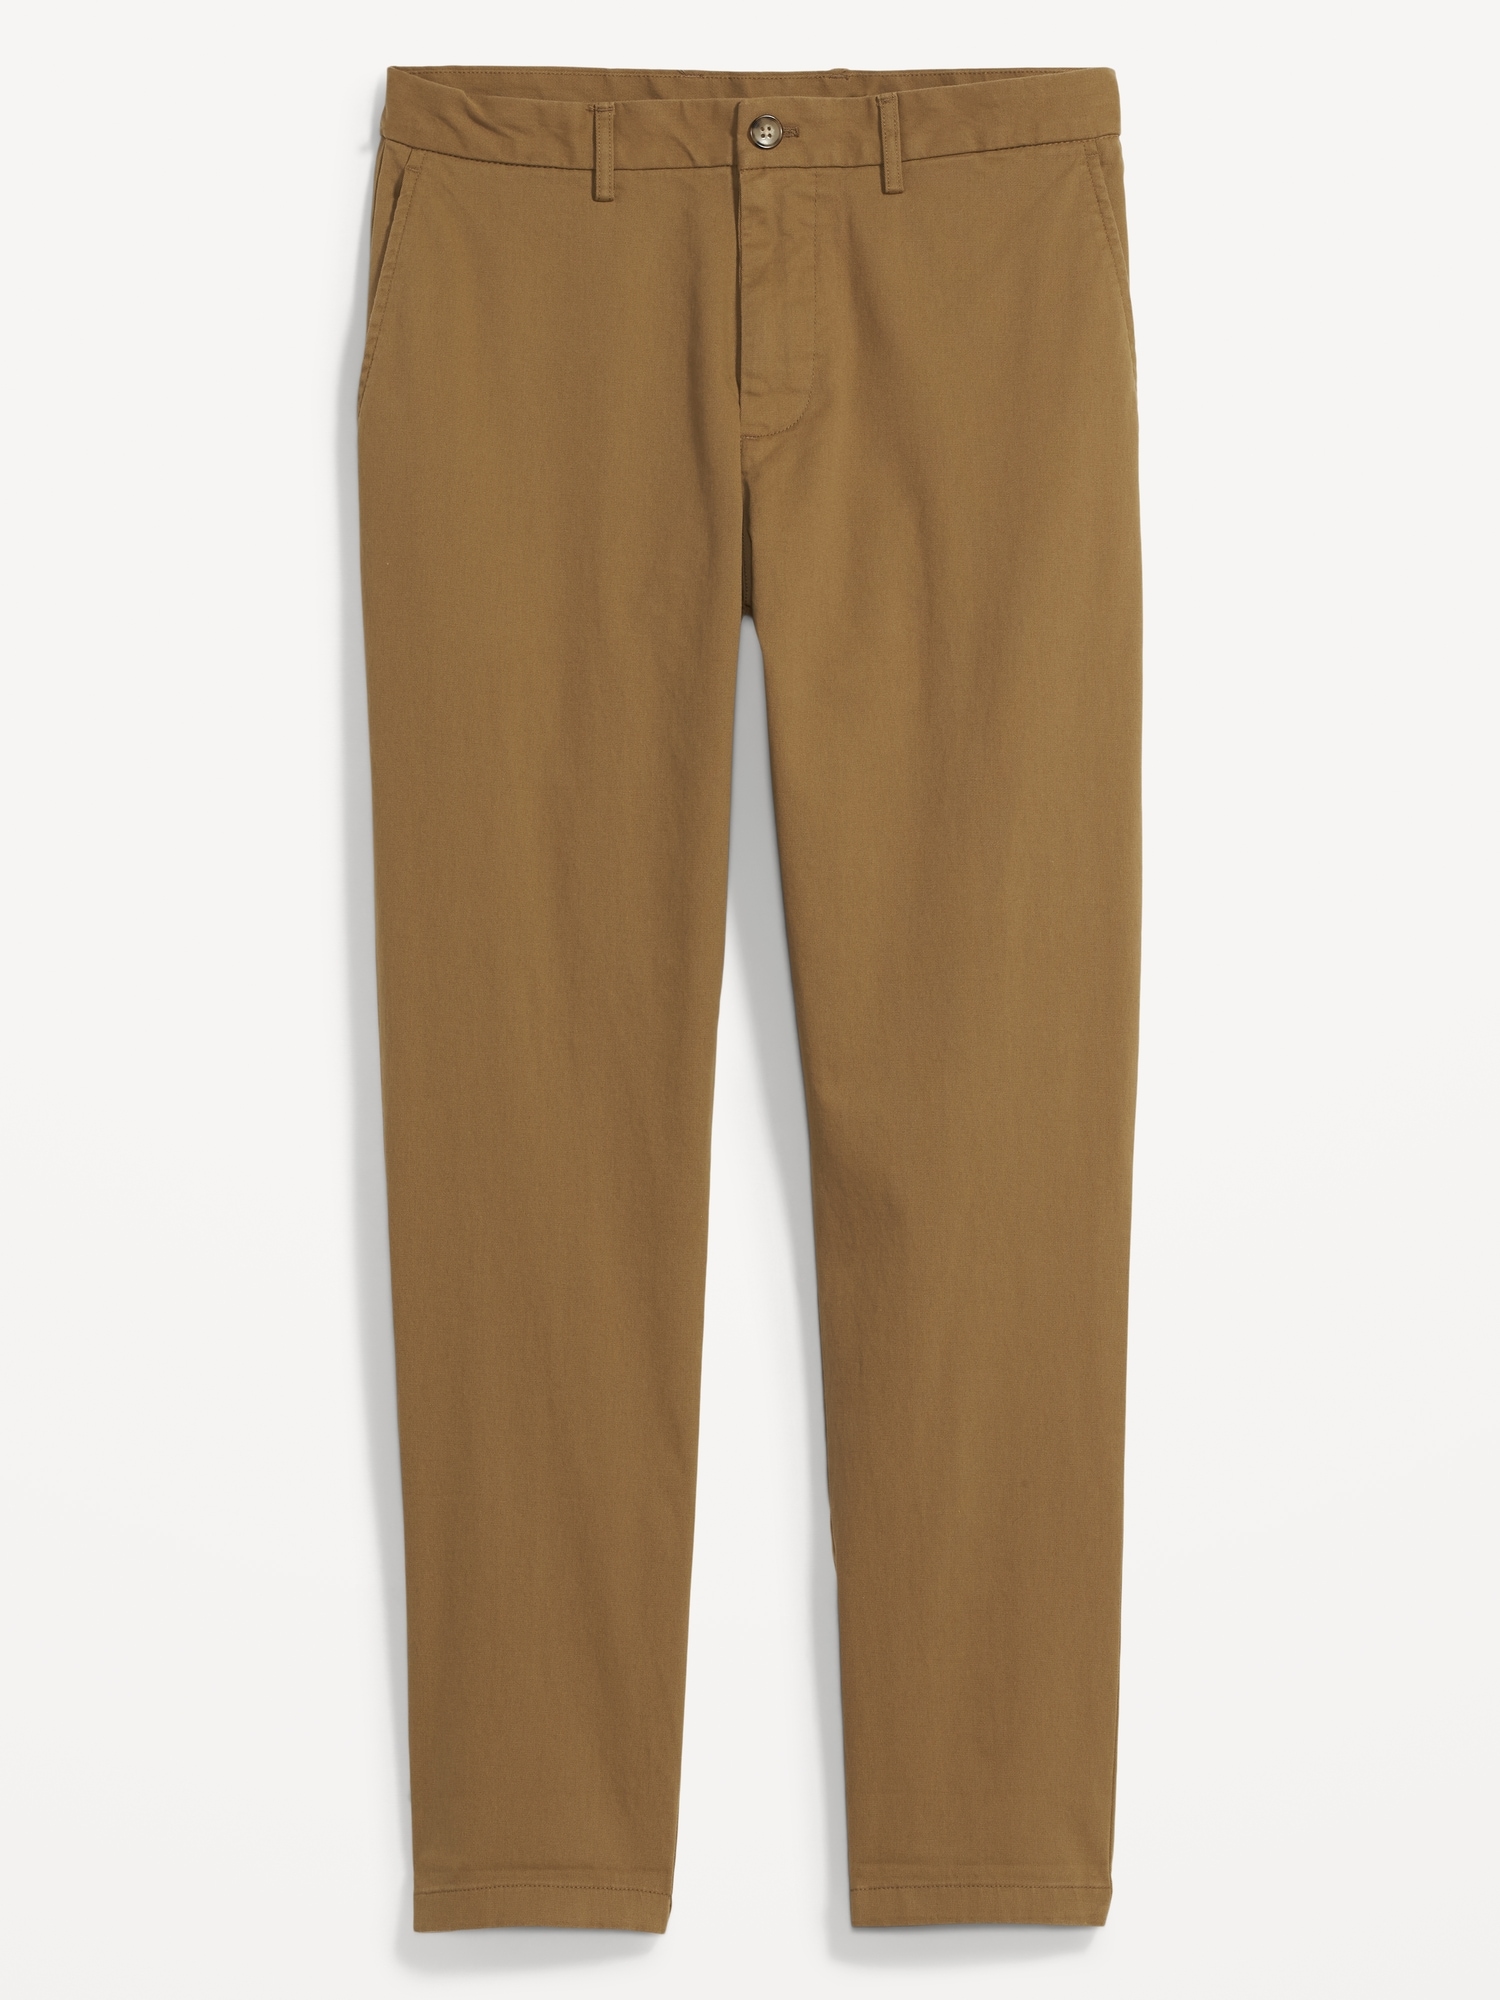 Loose Taper Built-In Flex Rotation Ankle-Length Chino Pants | Old Navy